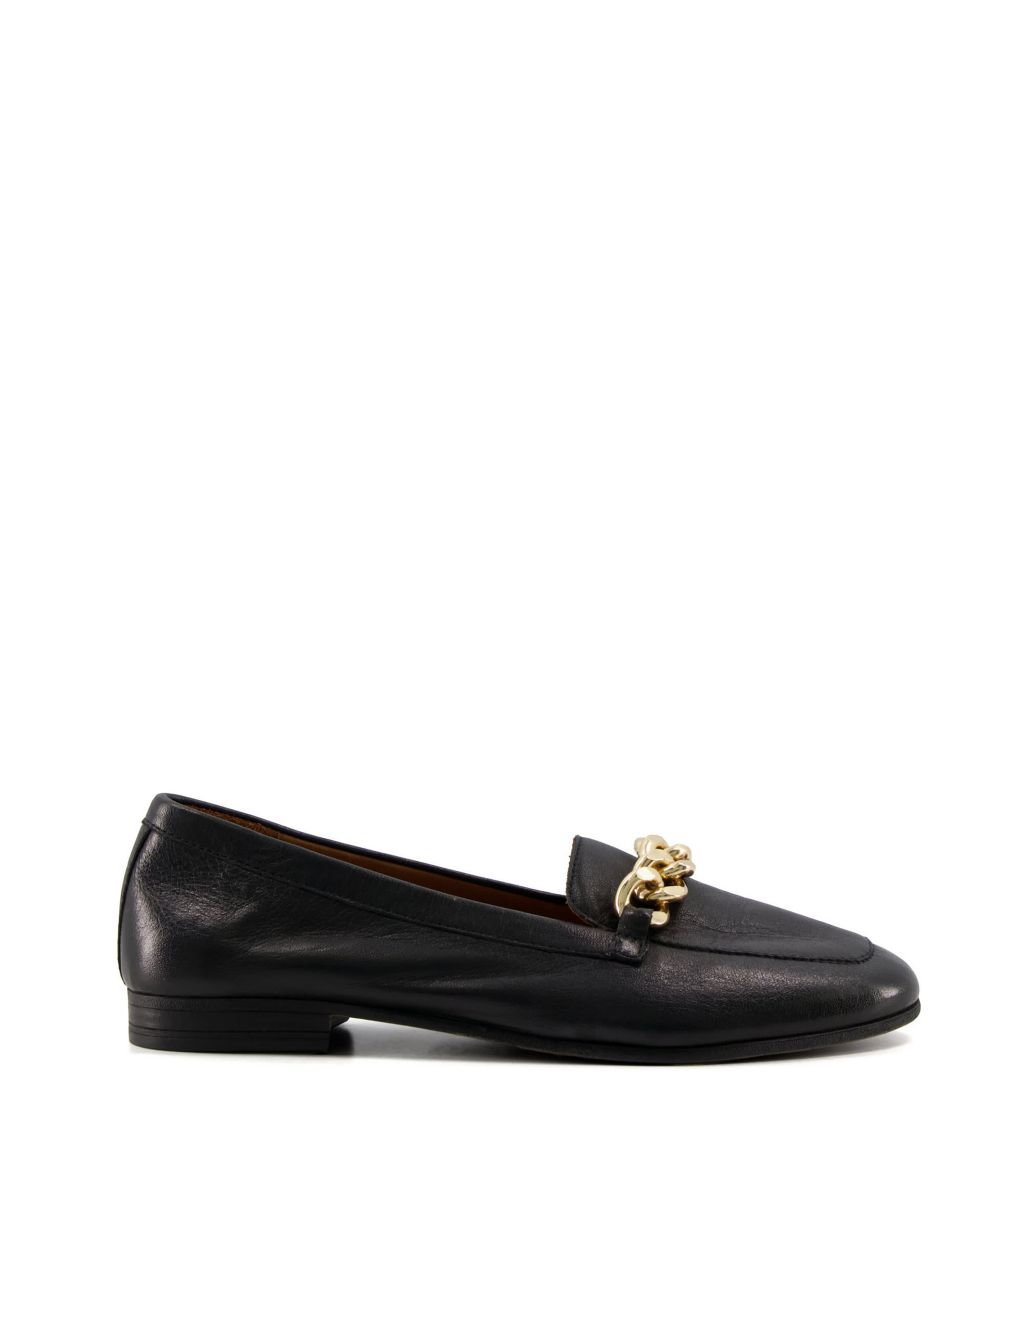 Buy Leather Chain Detail Flat Loafers | Dune London | M&S